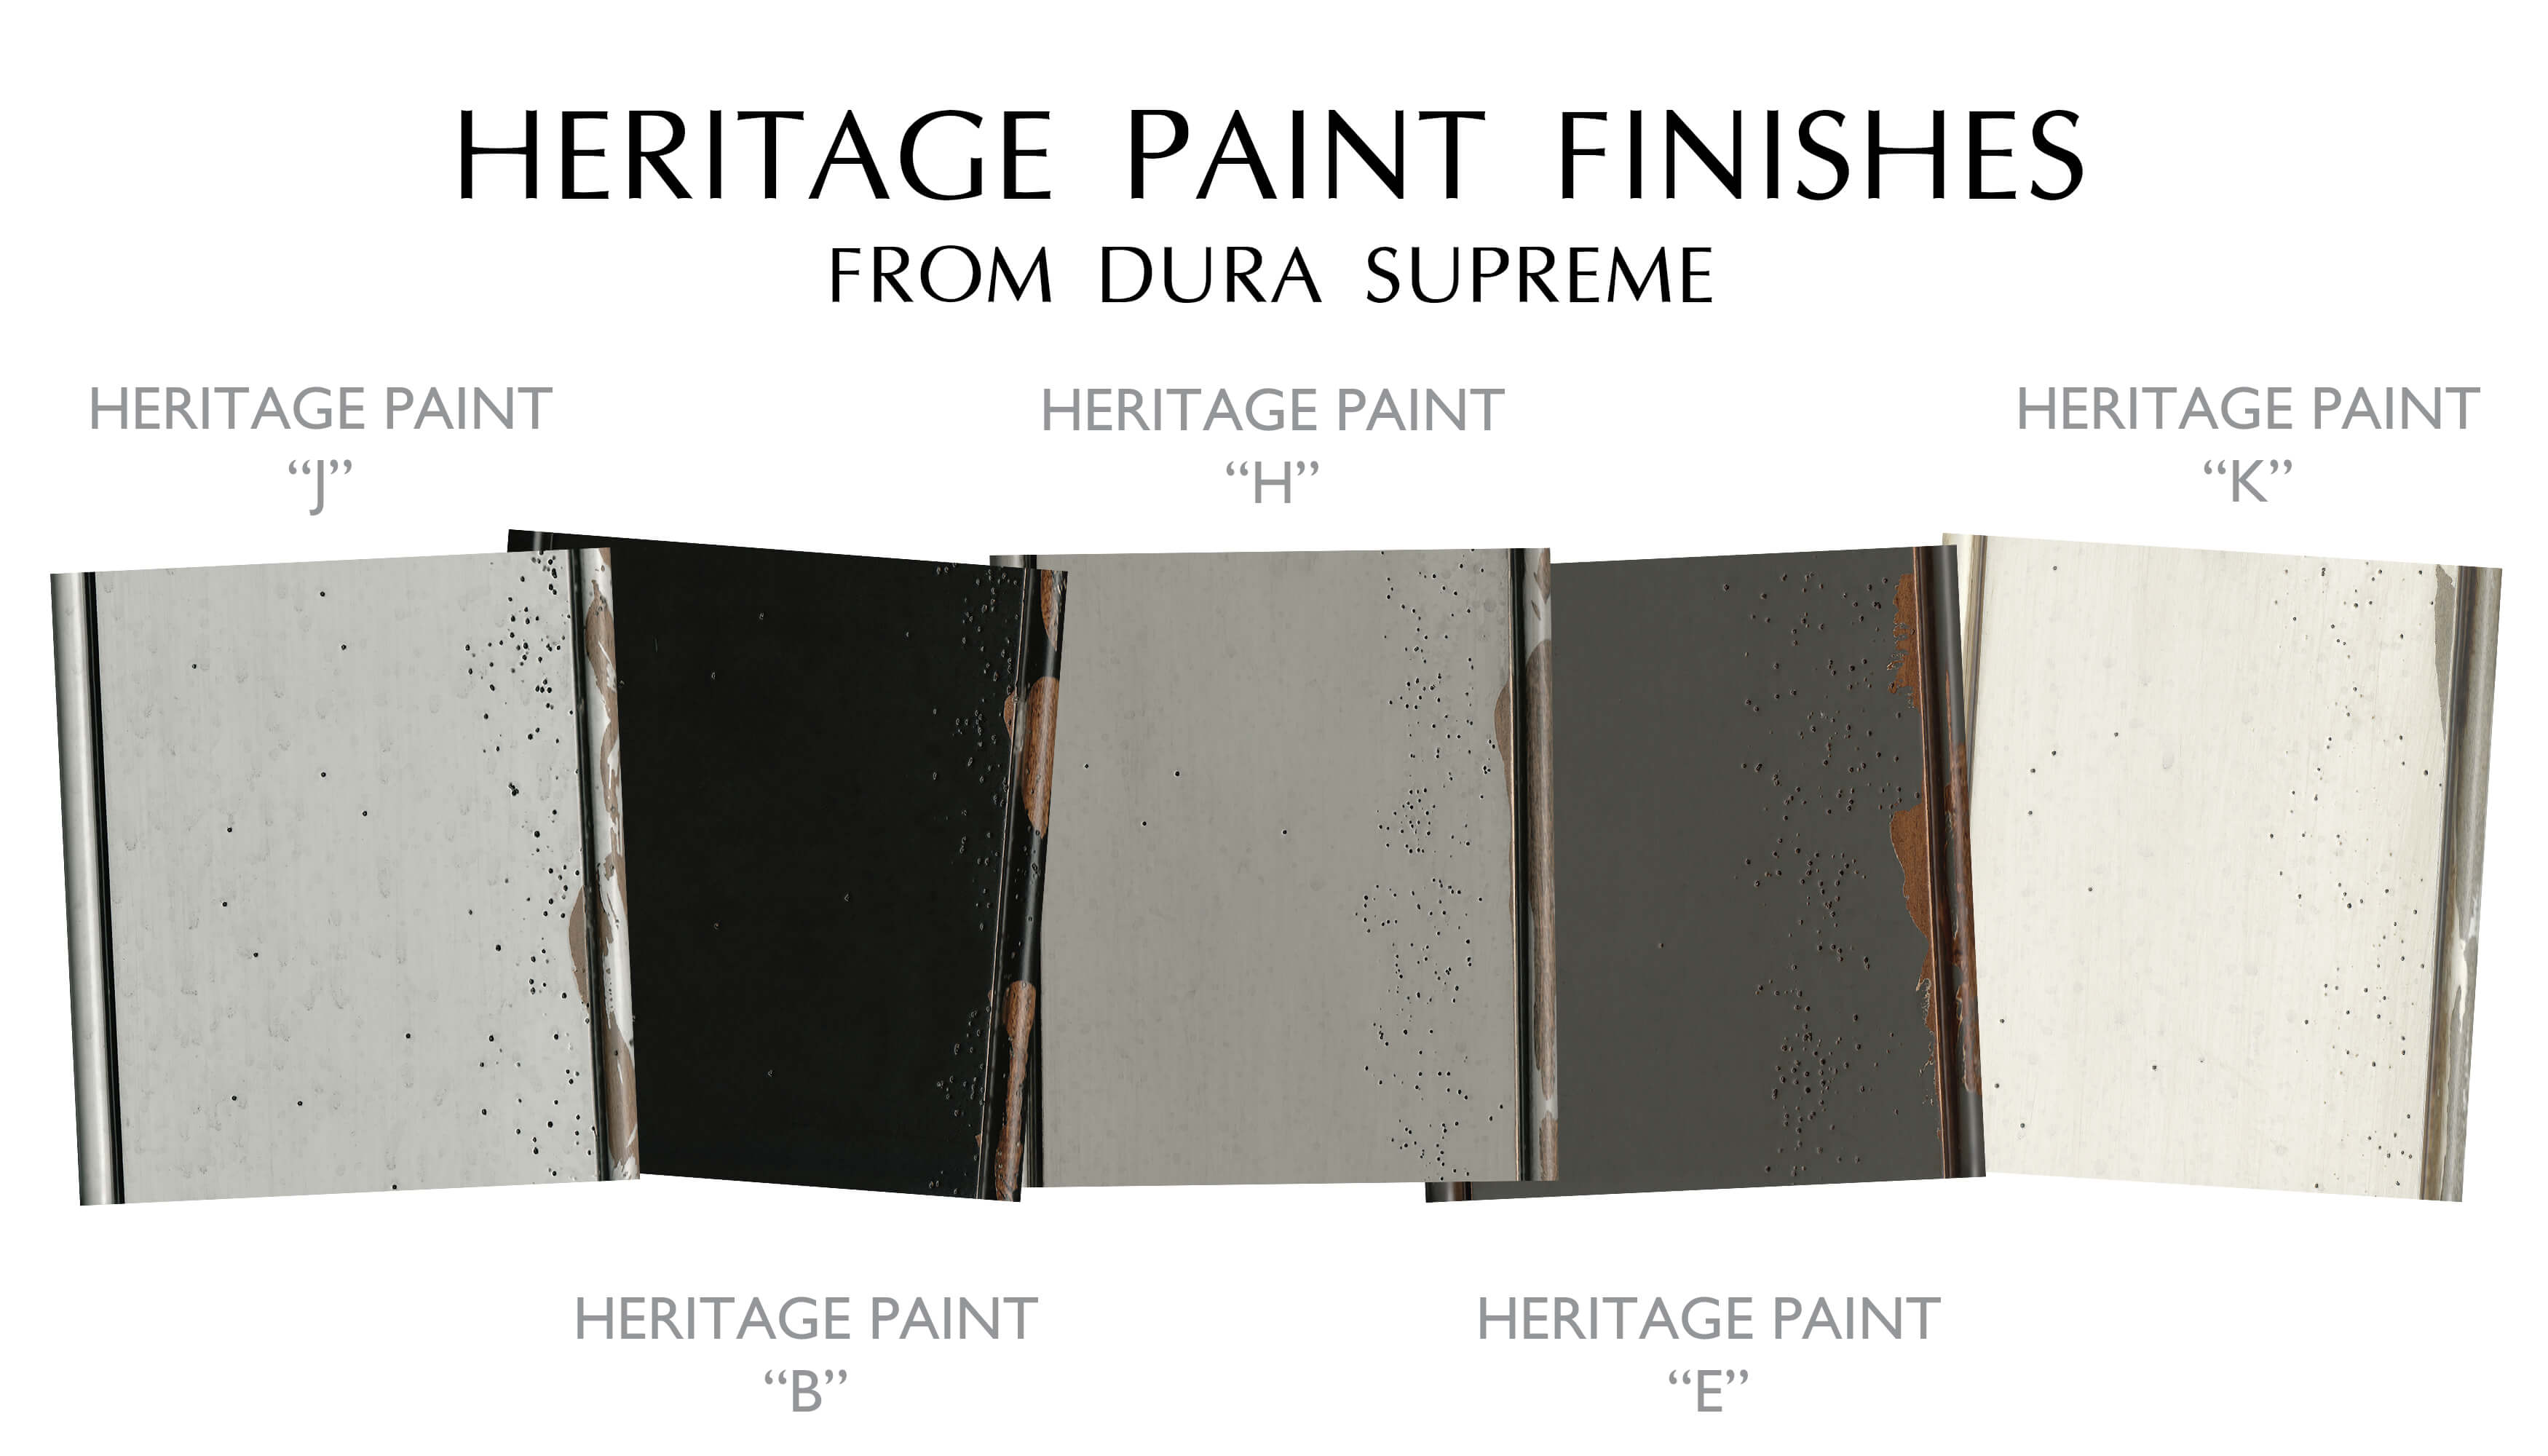 Heritage Paint finishes from Dura Supreme Cabinetry.